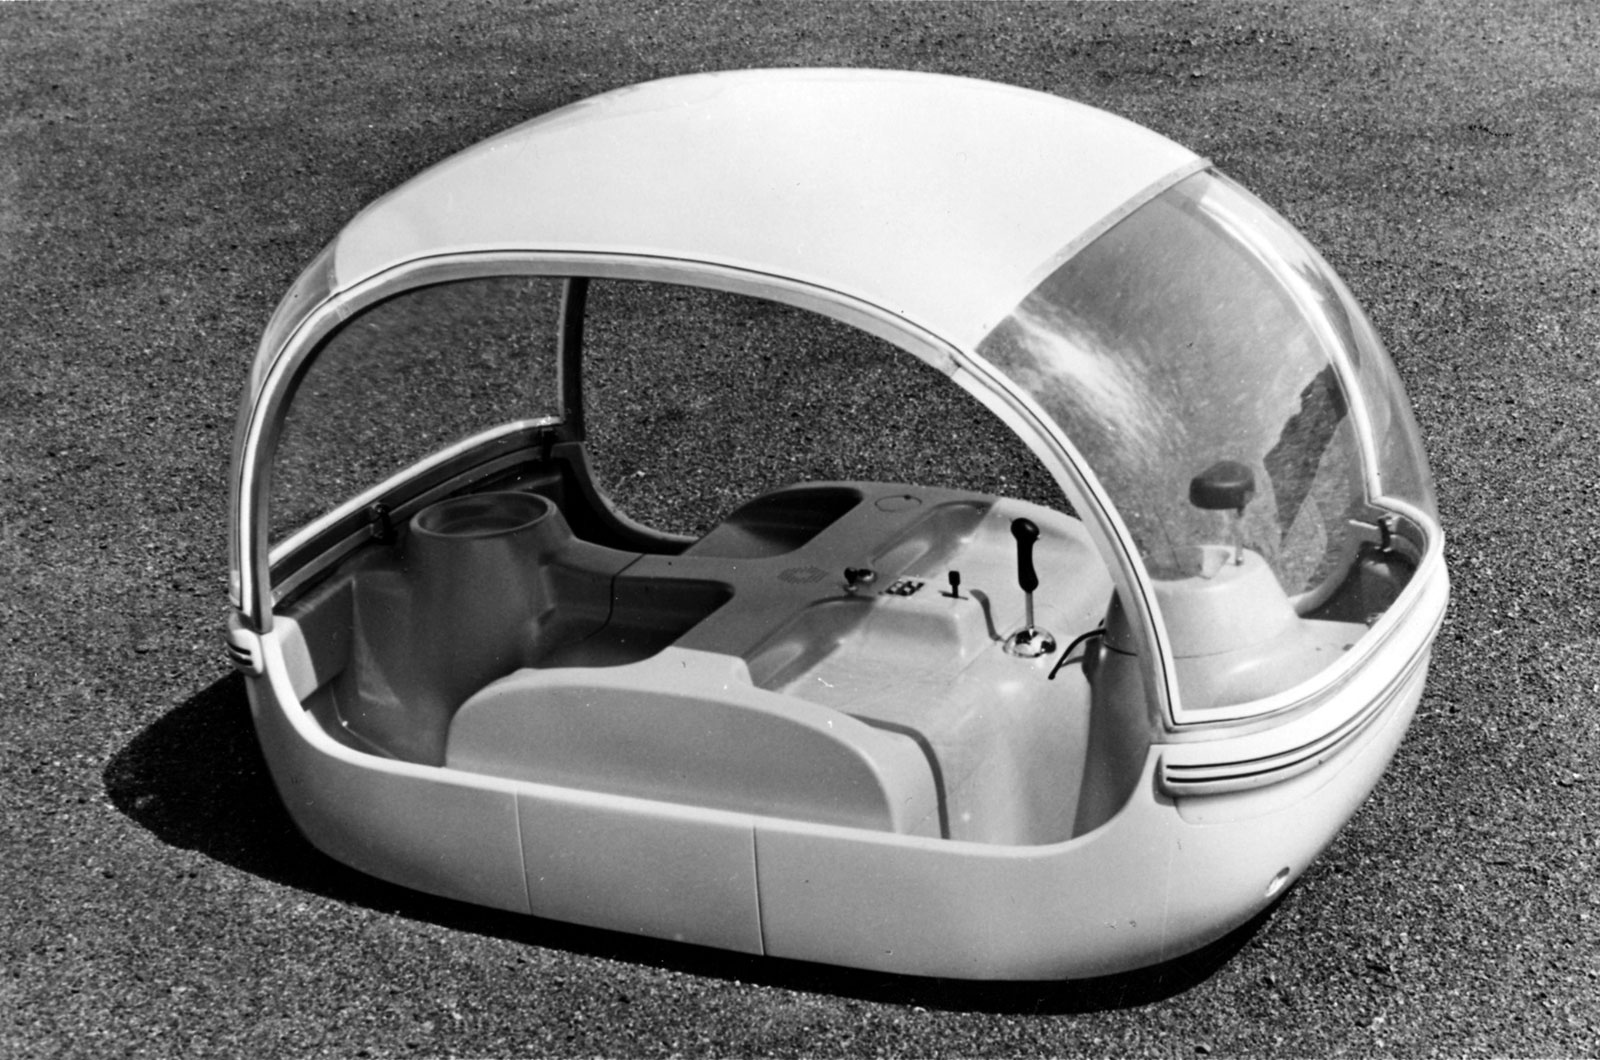 <p>Proposed specifically as an urban commuter car, the EX-005 offered seating for four, but little in the way of comfort as those seats were of moulded plastic. The weather protection was also pitiful and as far as crash safety was concerned, forget it. However, the rotary/electric hybrid powertrain was far-sighted, if something of a dead end.</p>